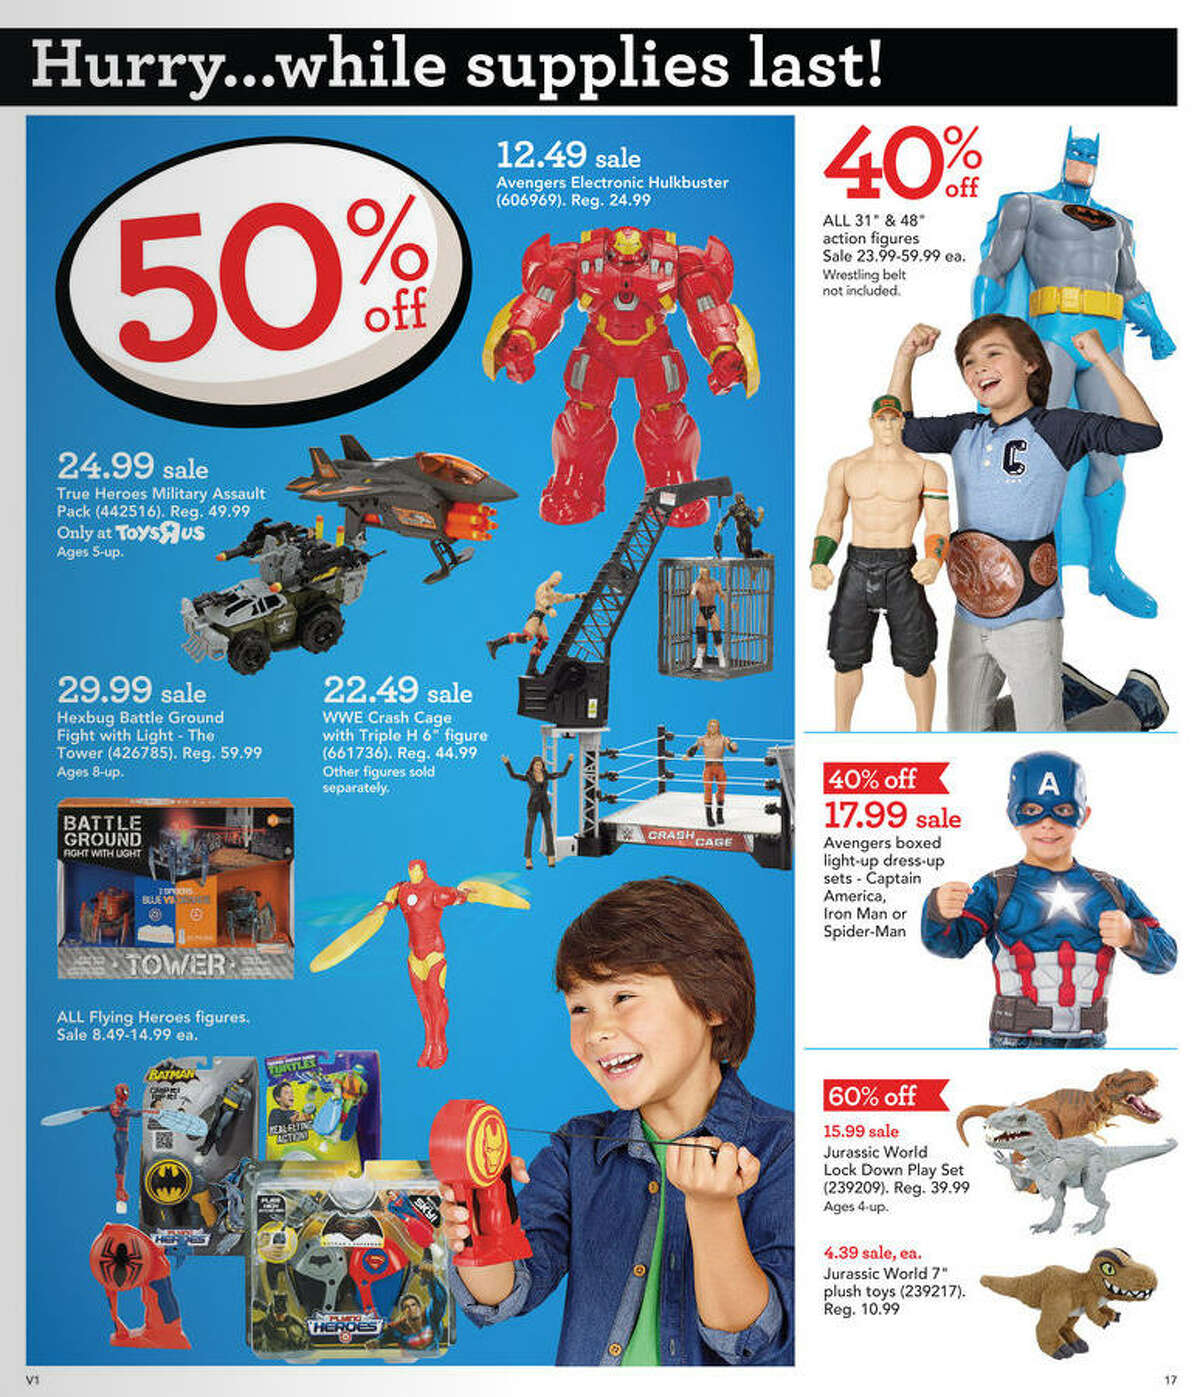 Toys "R" Us Black Friday 2016 ad circular released - Will Toys R Us Black Friday Deals Be Available Online